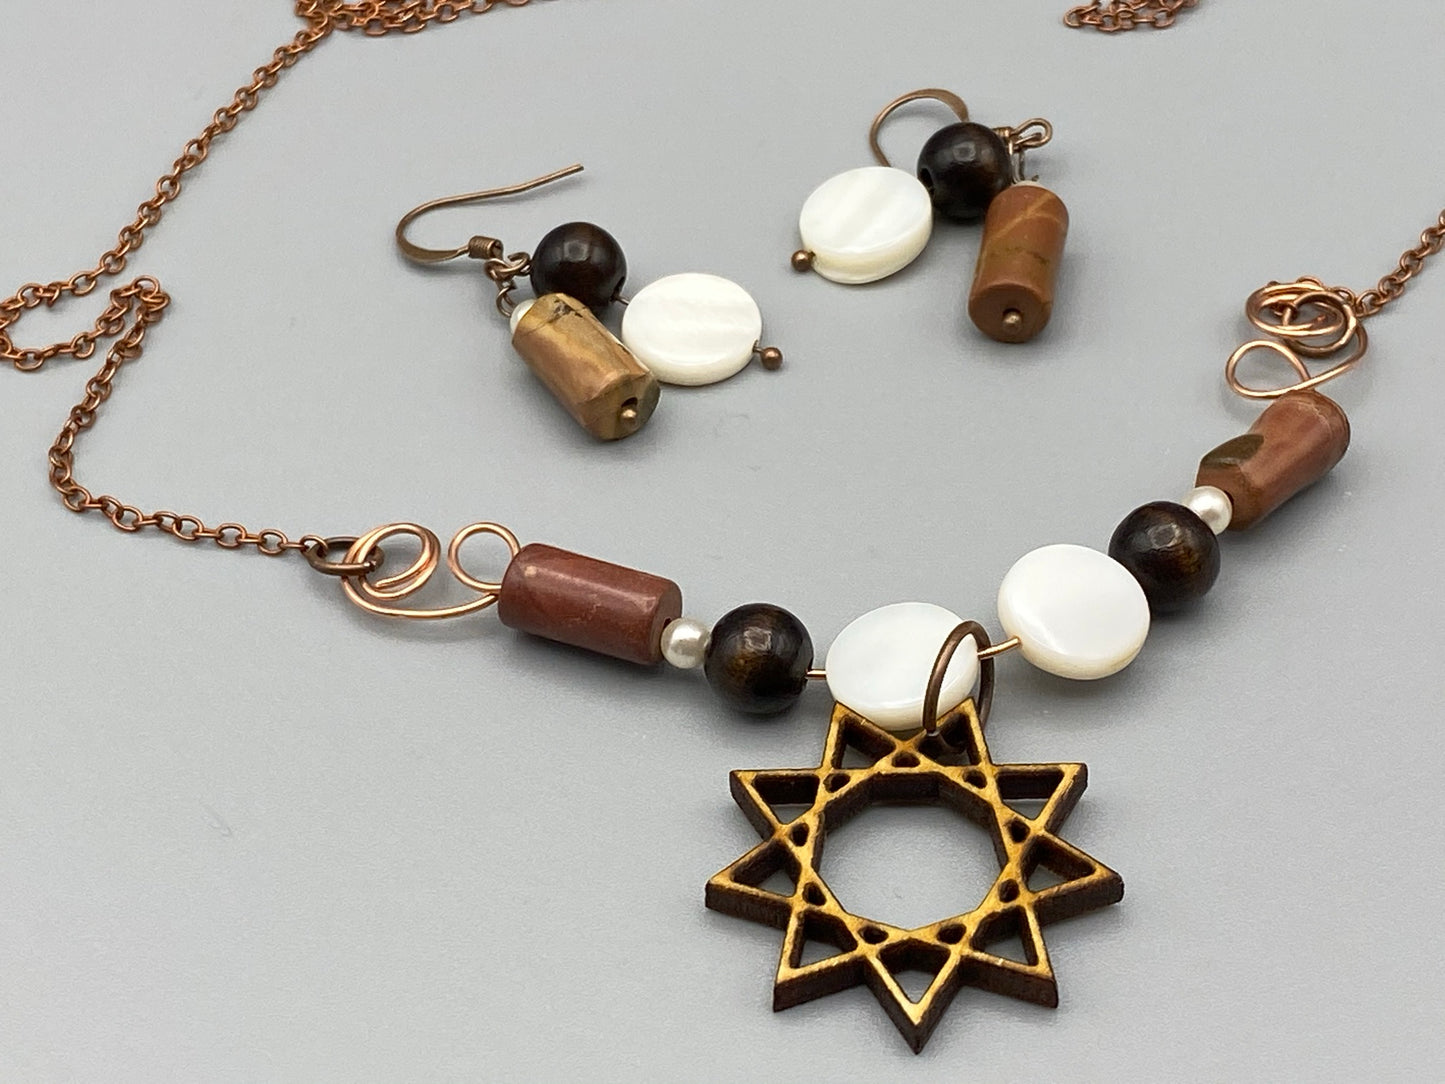 Nine Pointed Star Necklace and Earring Set with Beads and Wood